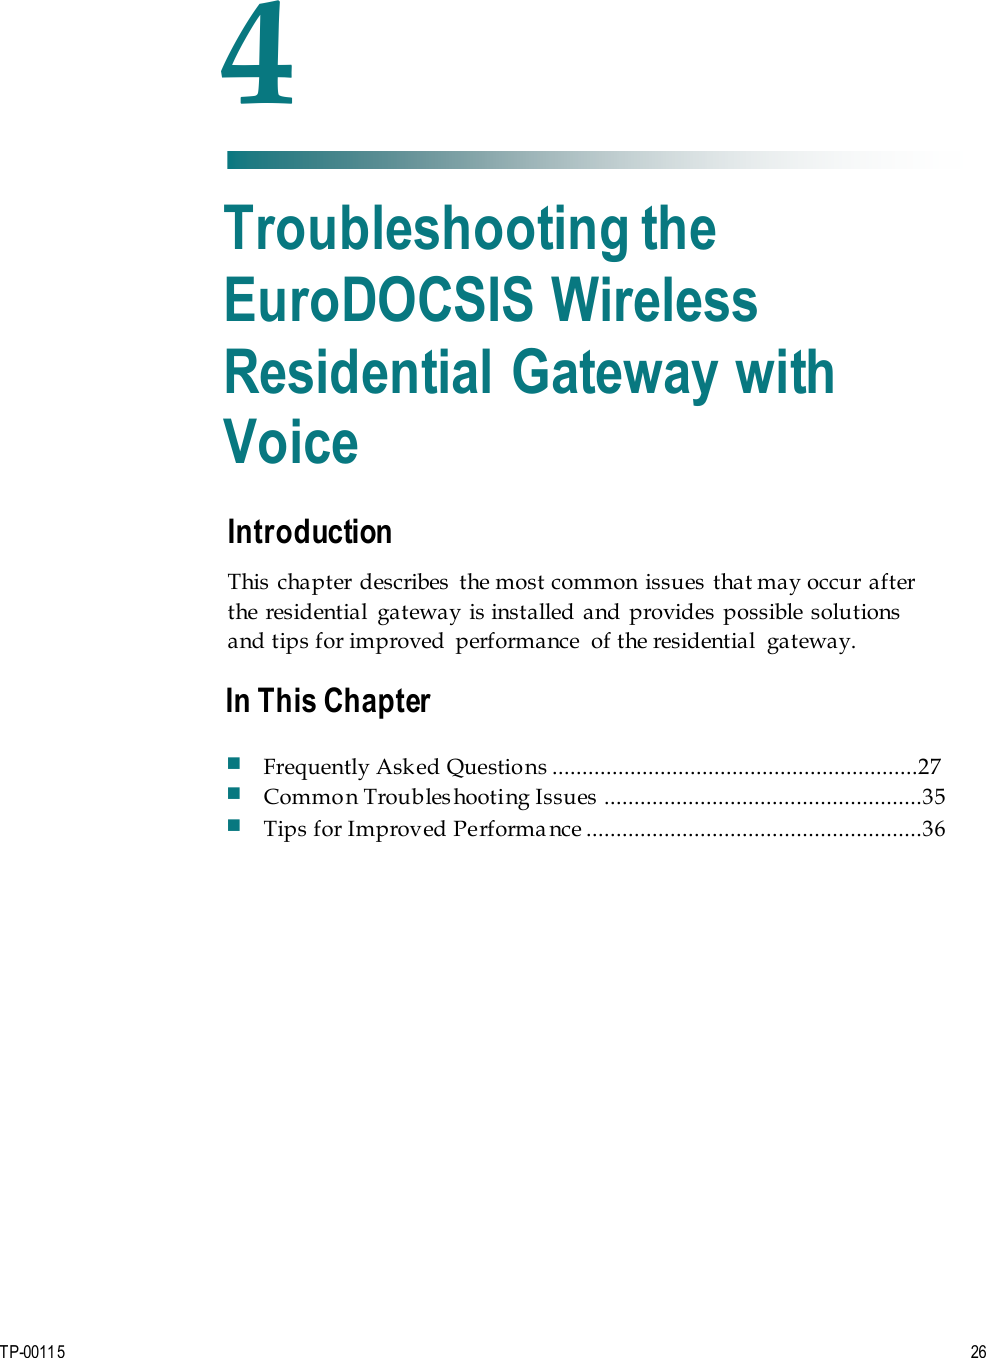 TP-00115  26Introduction This chapter  describes  the most common issues that may occur after the  residential  gateway is installed and provides possible solutions and tips for improved  performance  of the residential  gateway. 4 Chapter 4 Troubleshooting the EuroDOCSIS Wireless Residential Gateway with Voice In This Chapter Frequently Asked Questions .............................................................27 Common Troubleshooting Issues  .....................................................35 Tips for Improved Performa nce ........................................................36 